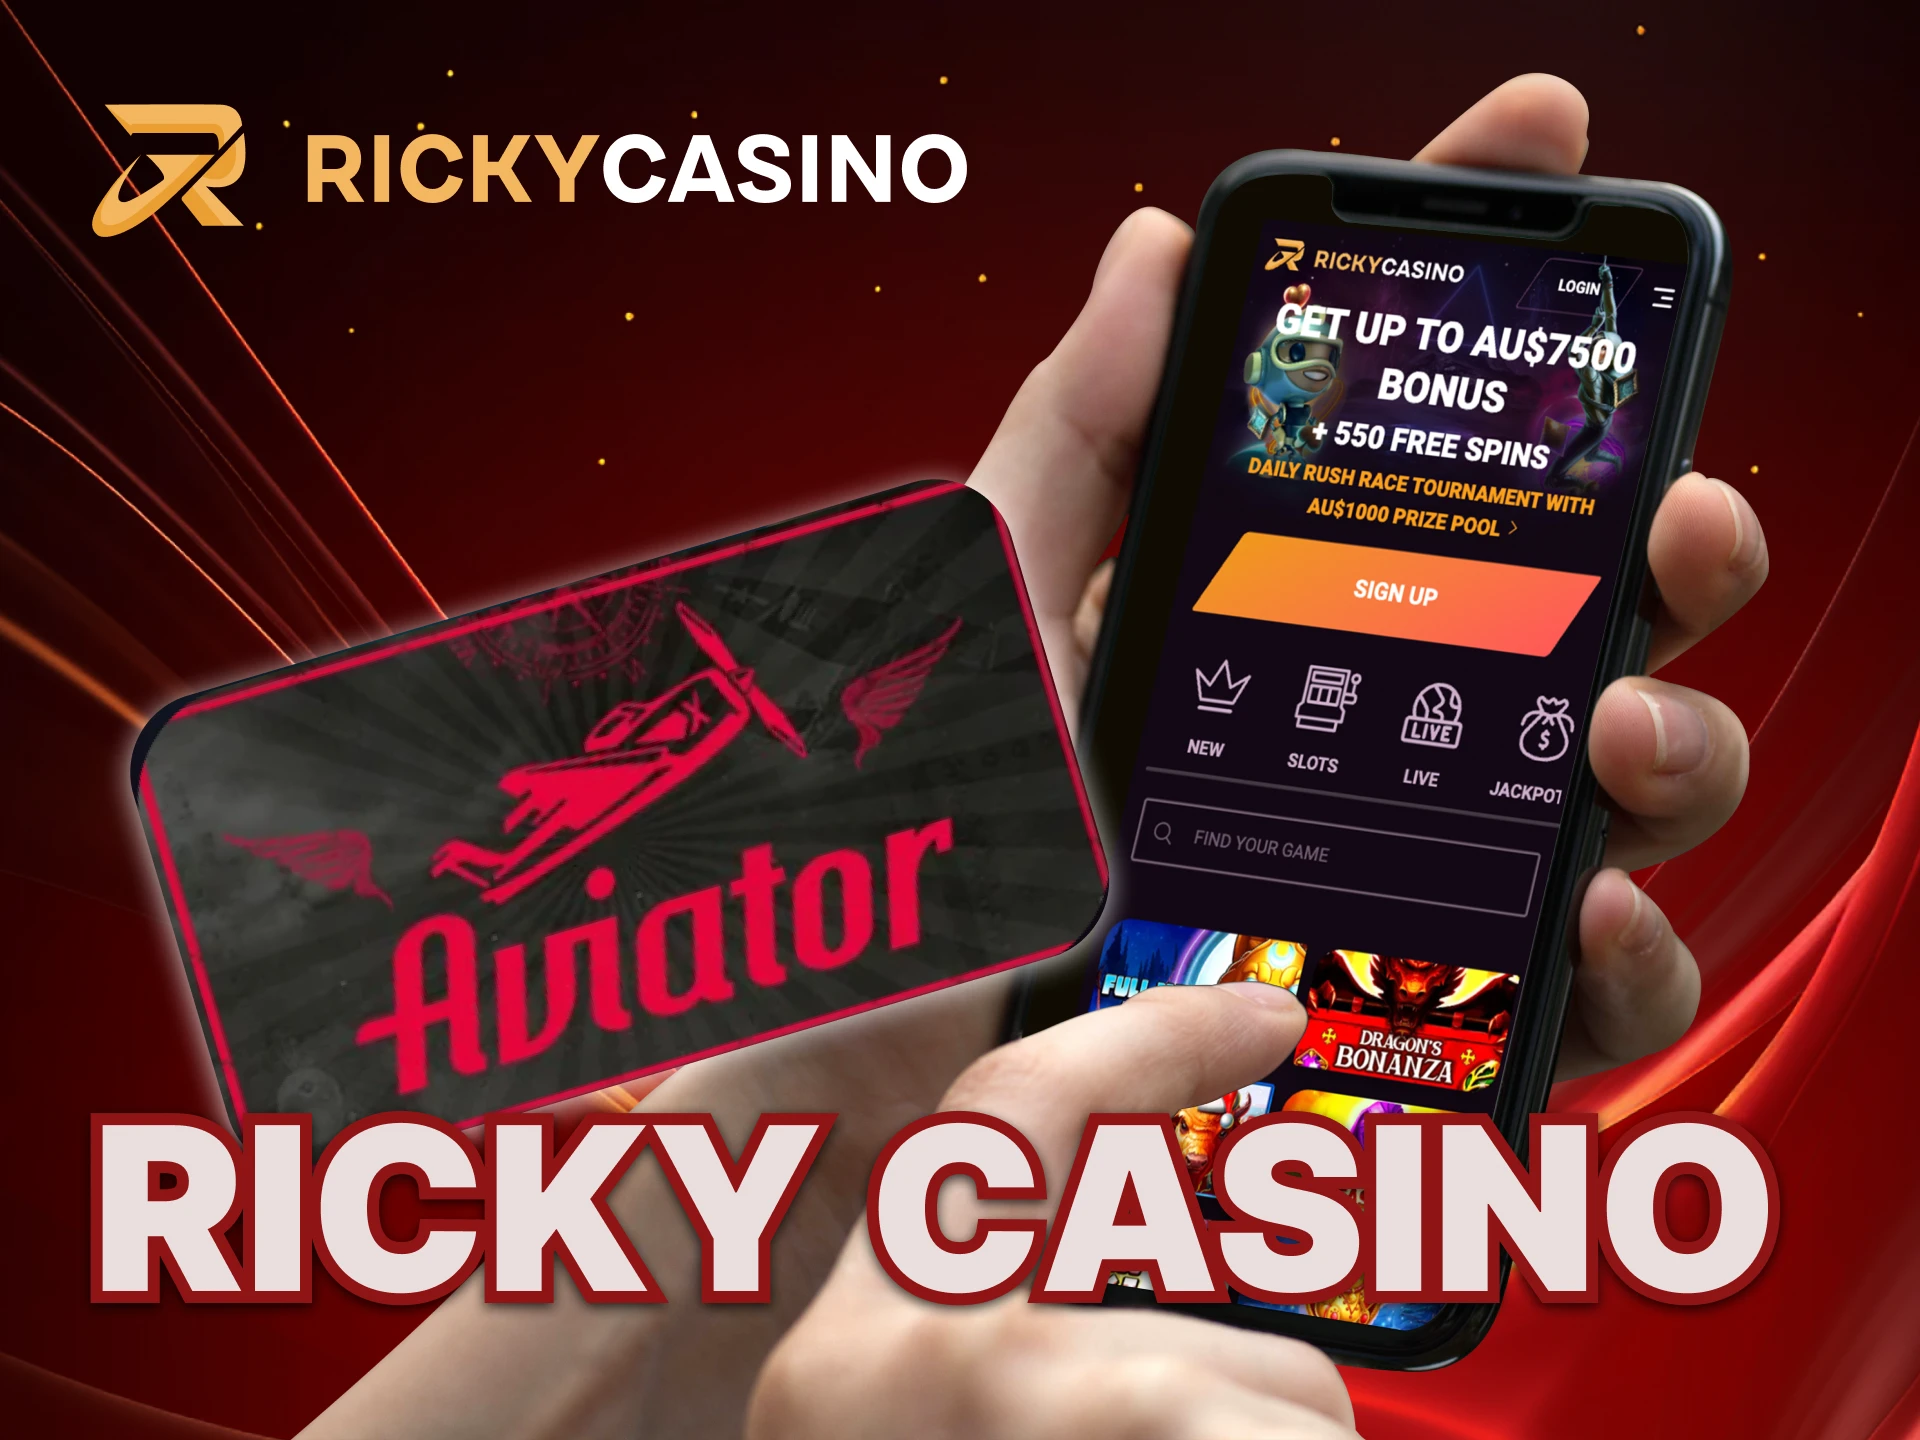 What options are there in the Ricky Casino mobile app.